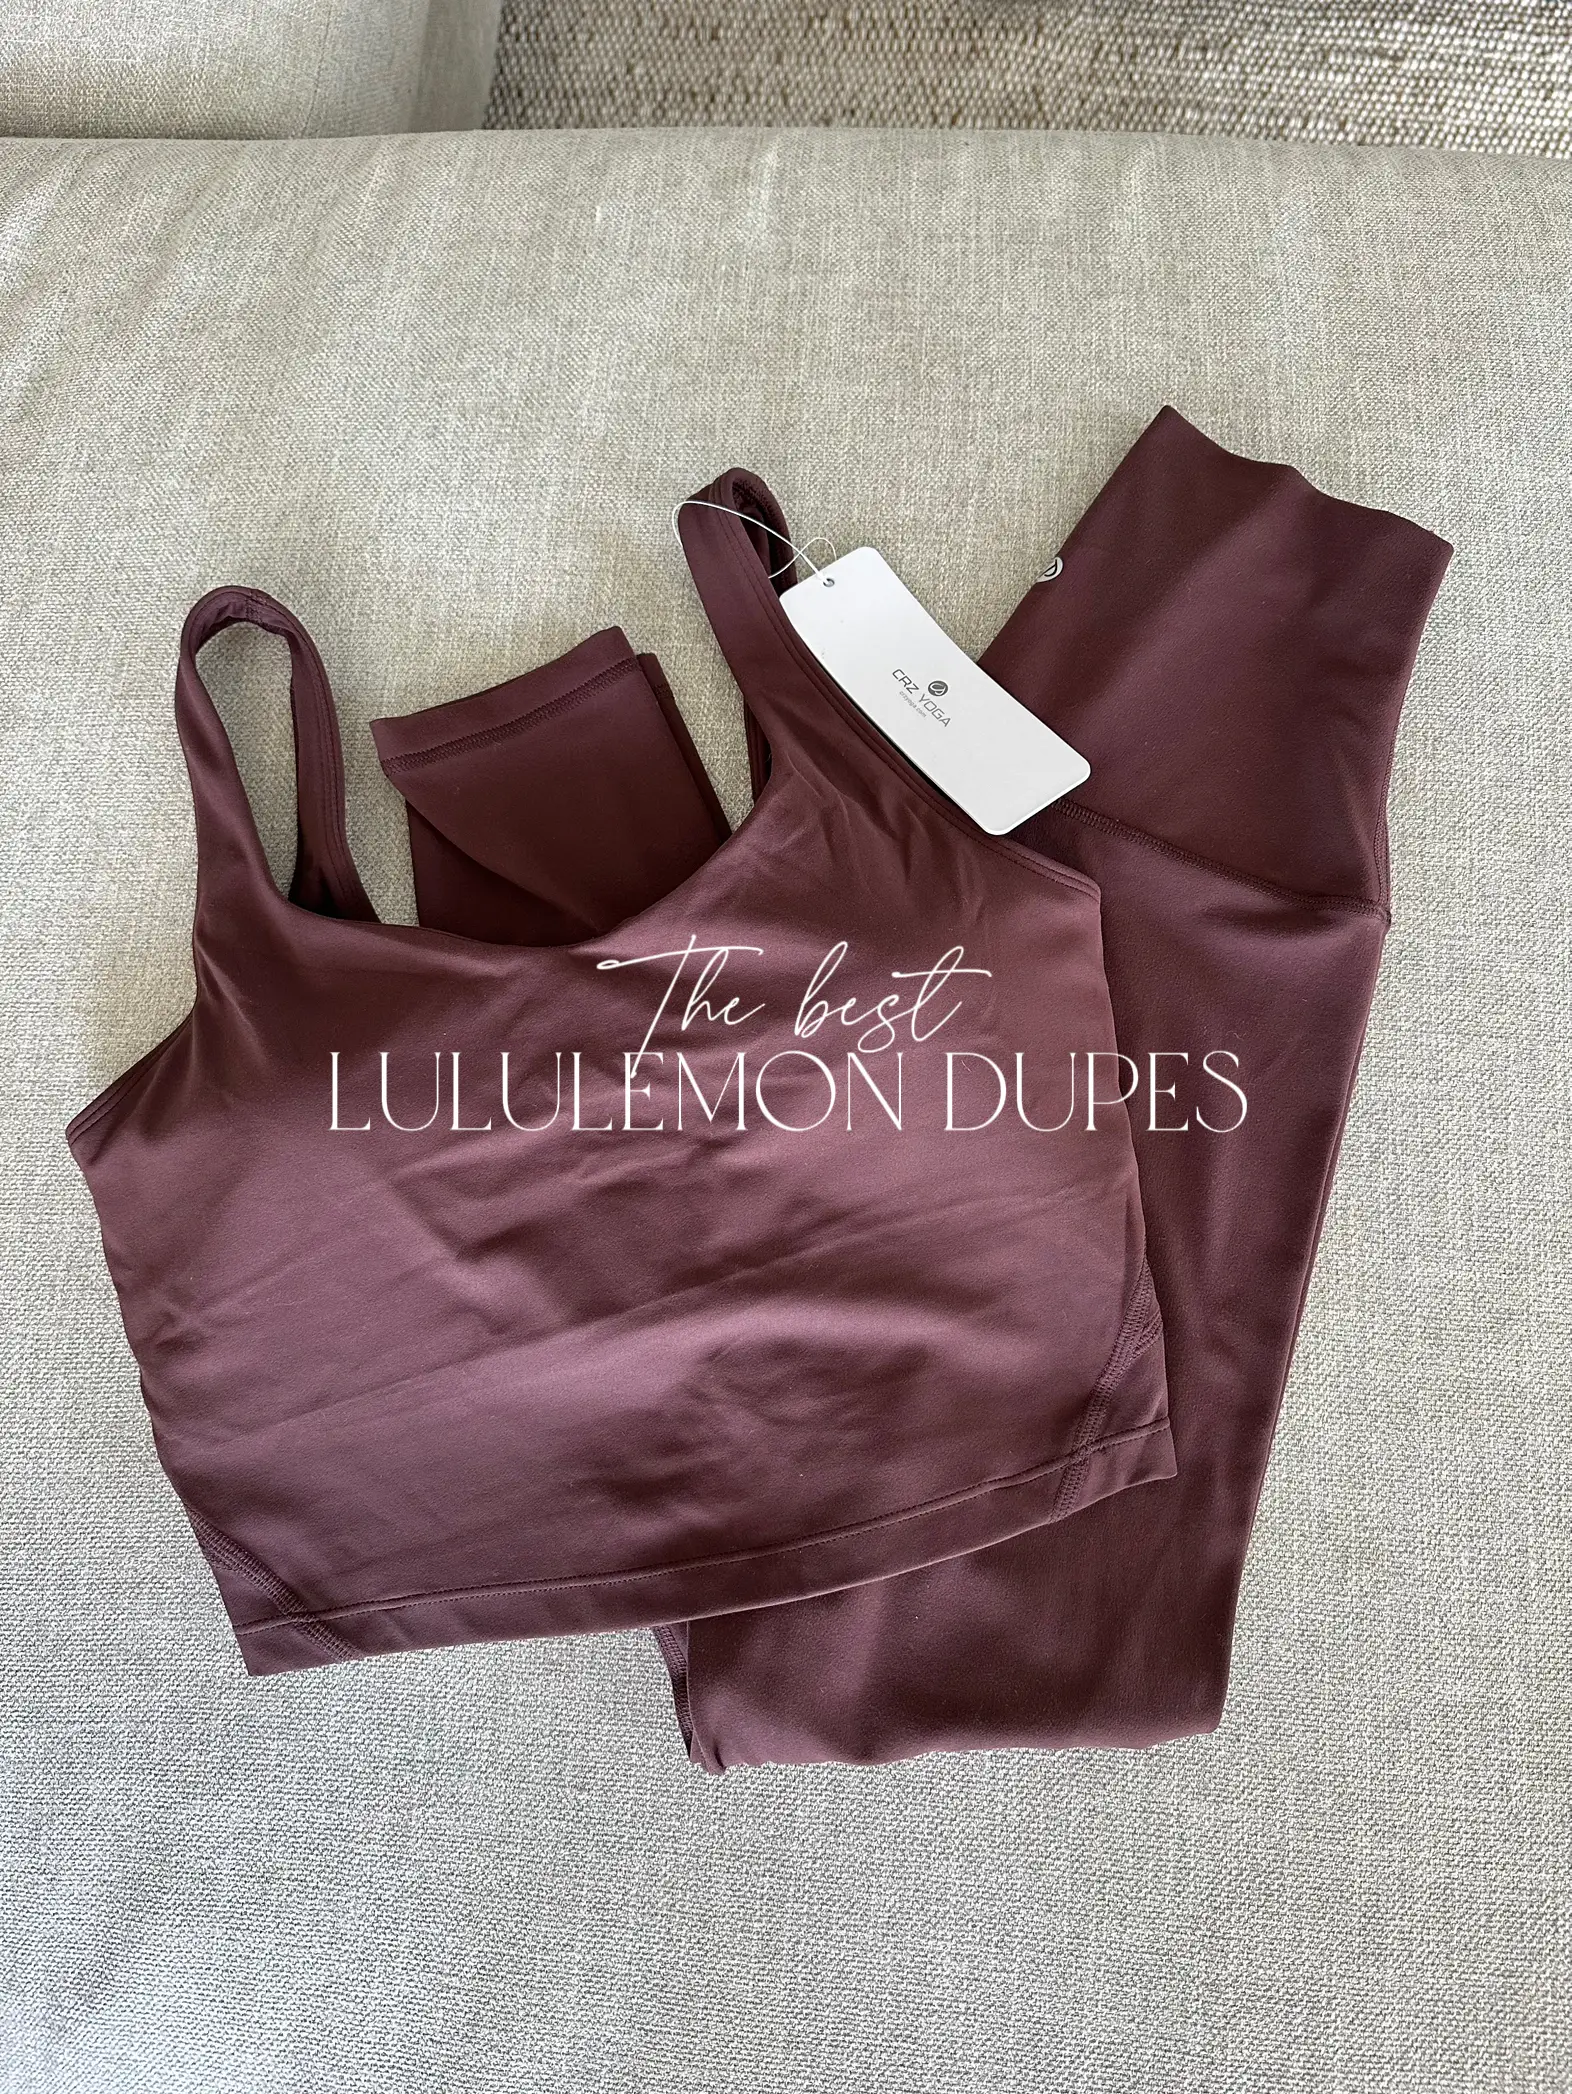 if lululemon wont launch the flow y in larher cup sizes, bezos